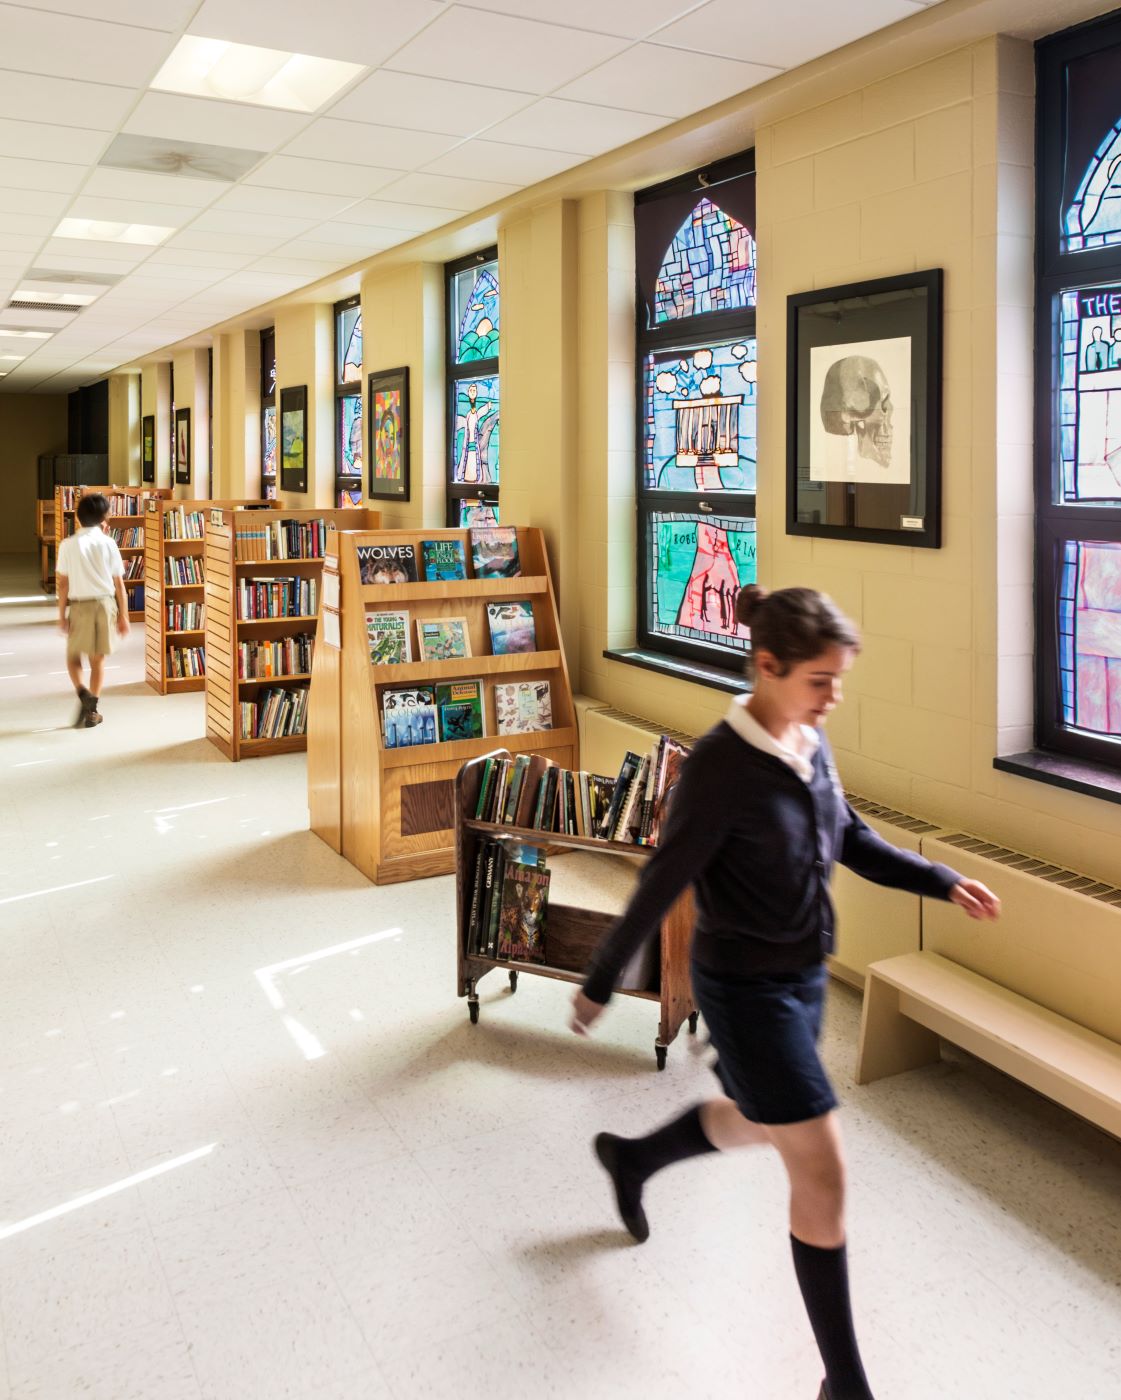 Internal school building with stained glass windows and a kid walking in the foreground